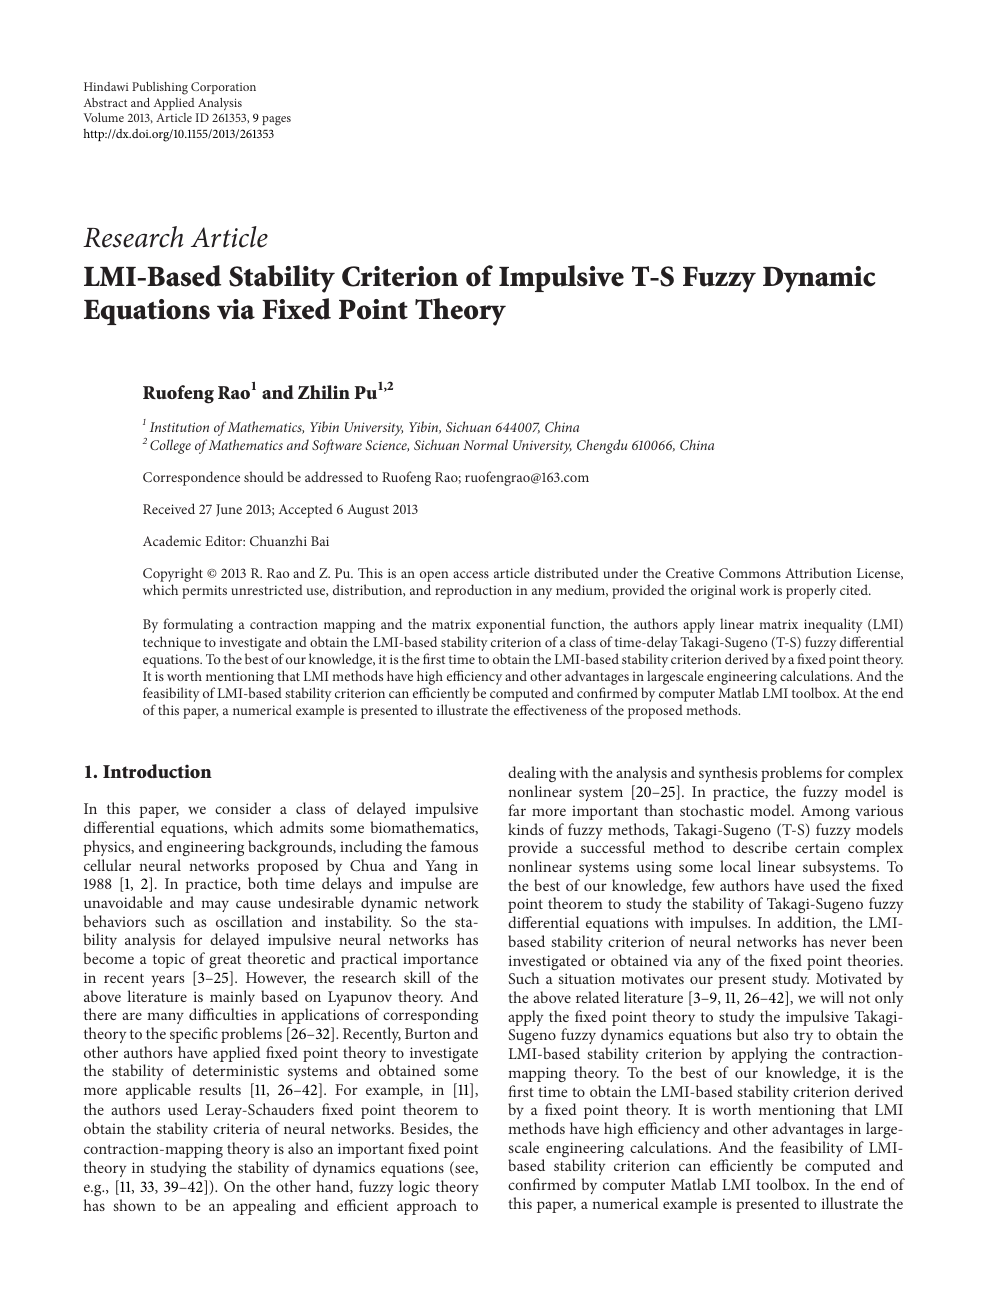 Lmi Based Stability Criterion Of Impulsive T S Fuzzy Dynamic Equations Via Fixed Point Theory Topic Of Research Paper In Mathematics Download Scholarly Article Pdf And Read For Free On Cyberleninka Open Science